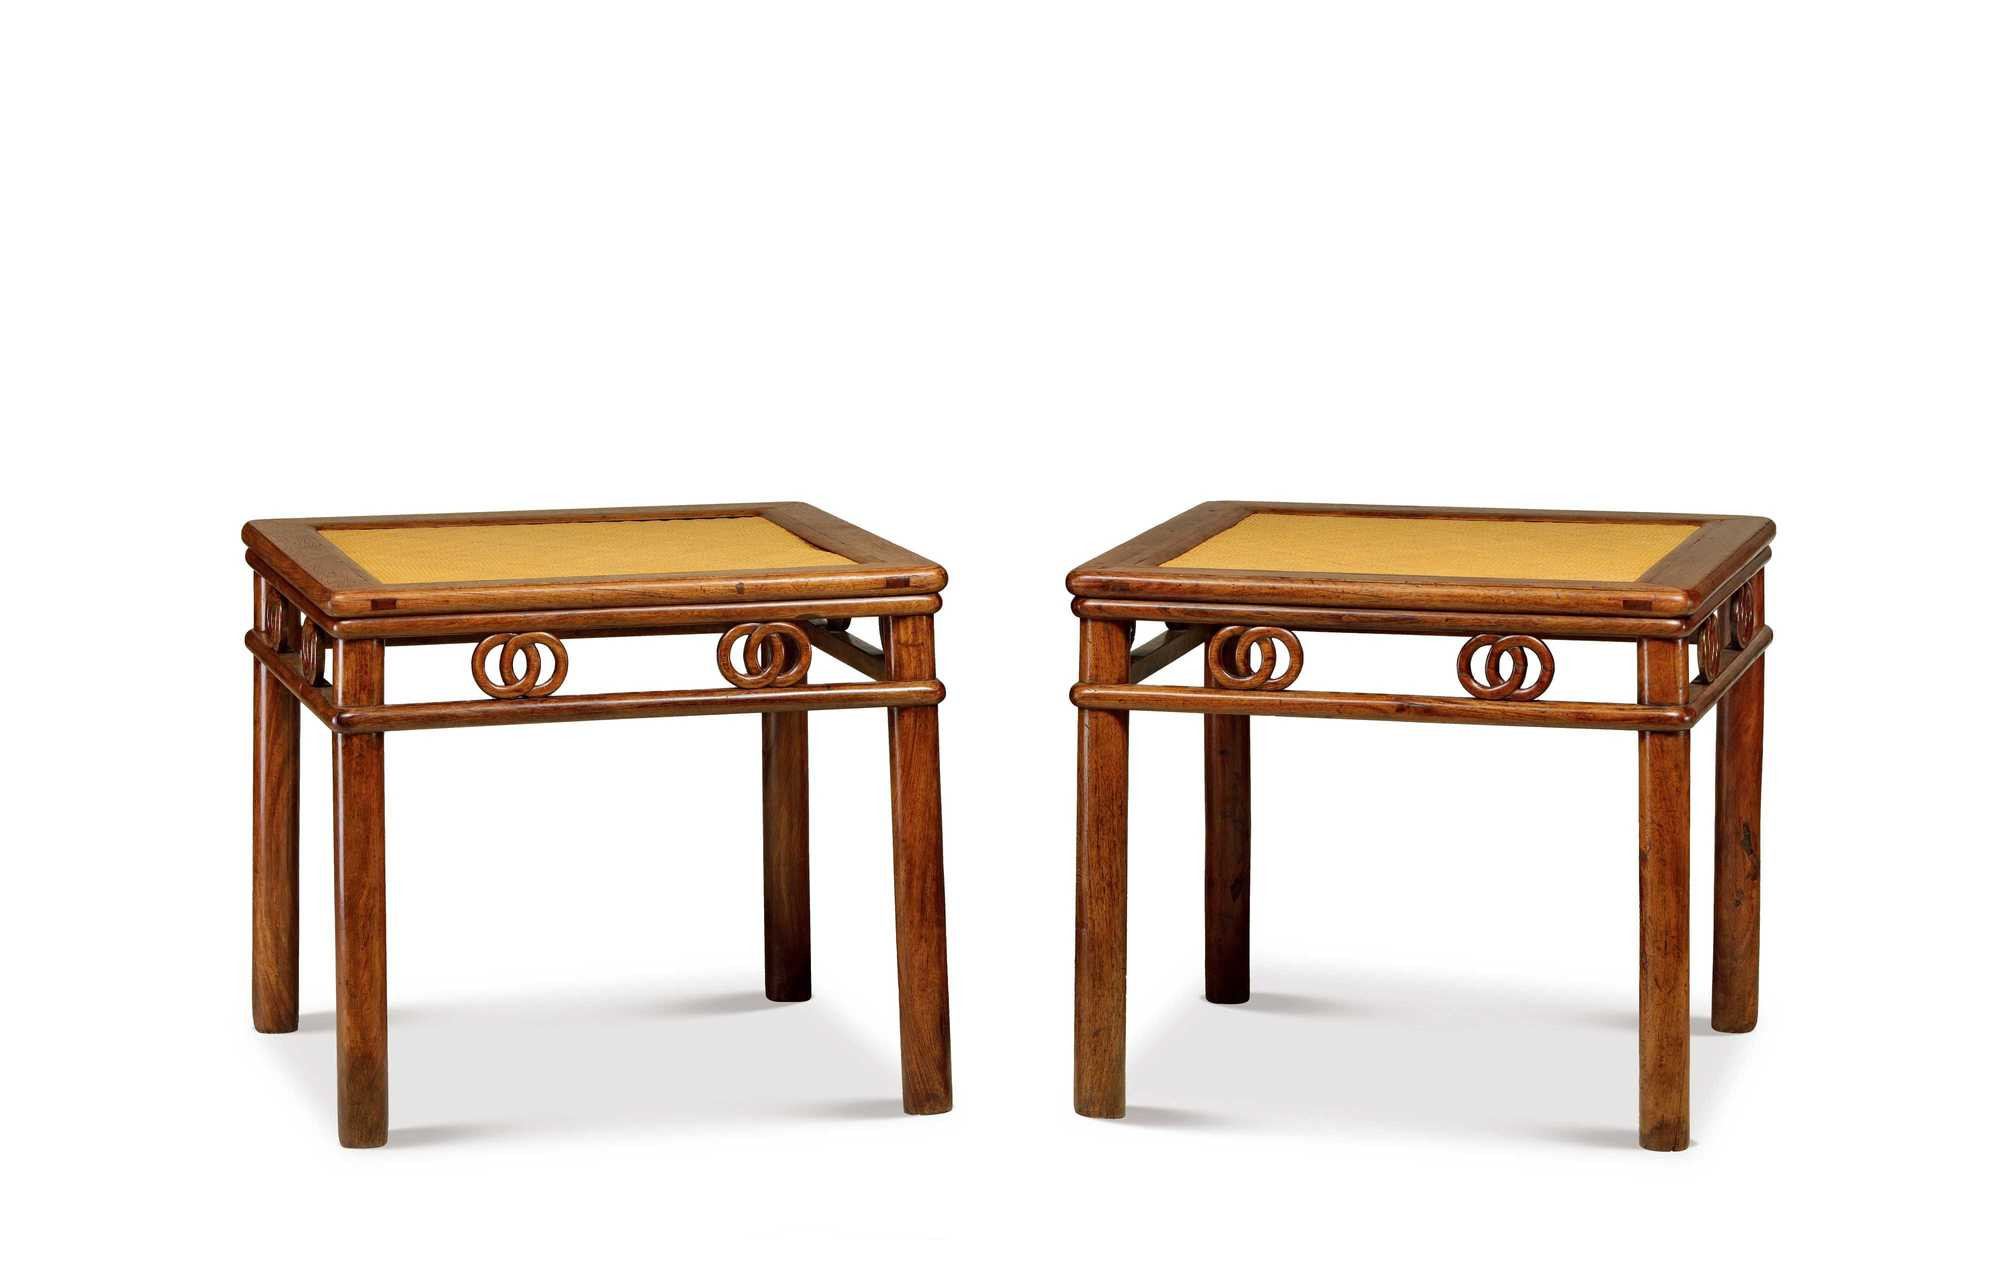 PAIR OF HUANGHUALI WOODEN SQUARE STOOLS WITH ROUNDED LEGS AND STRUTTED BY INTERLOCKING BICYCLO BRACES